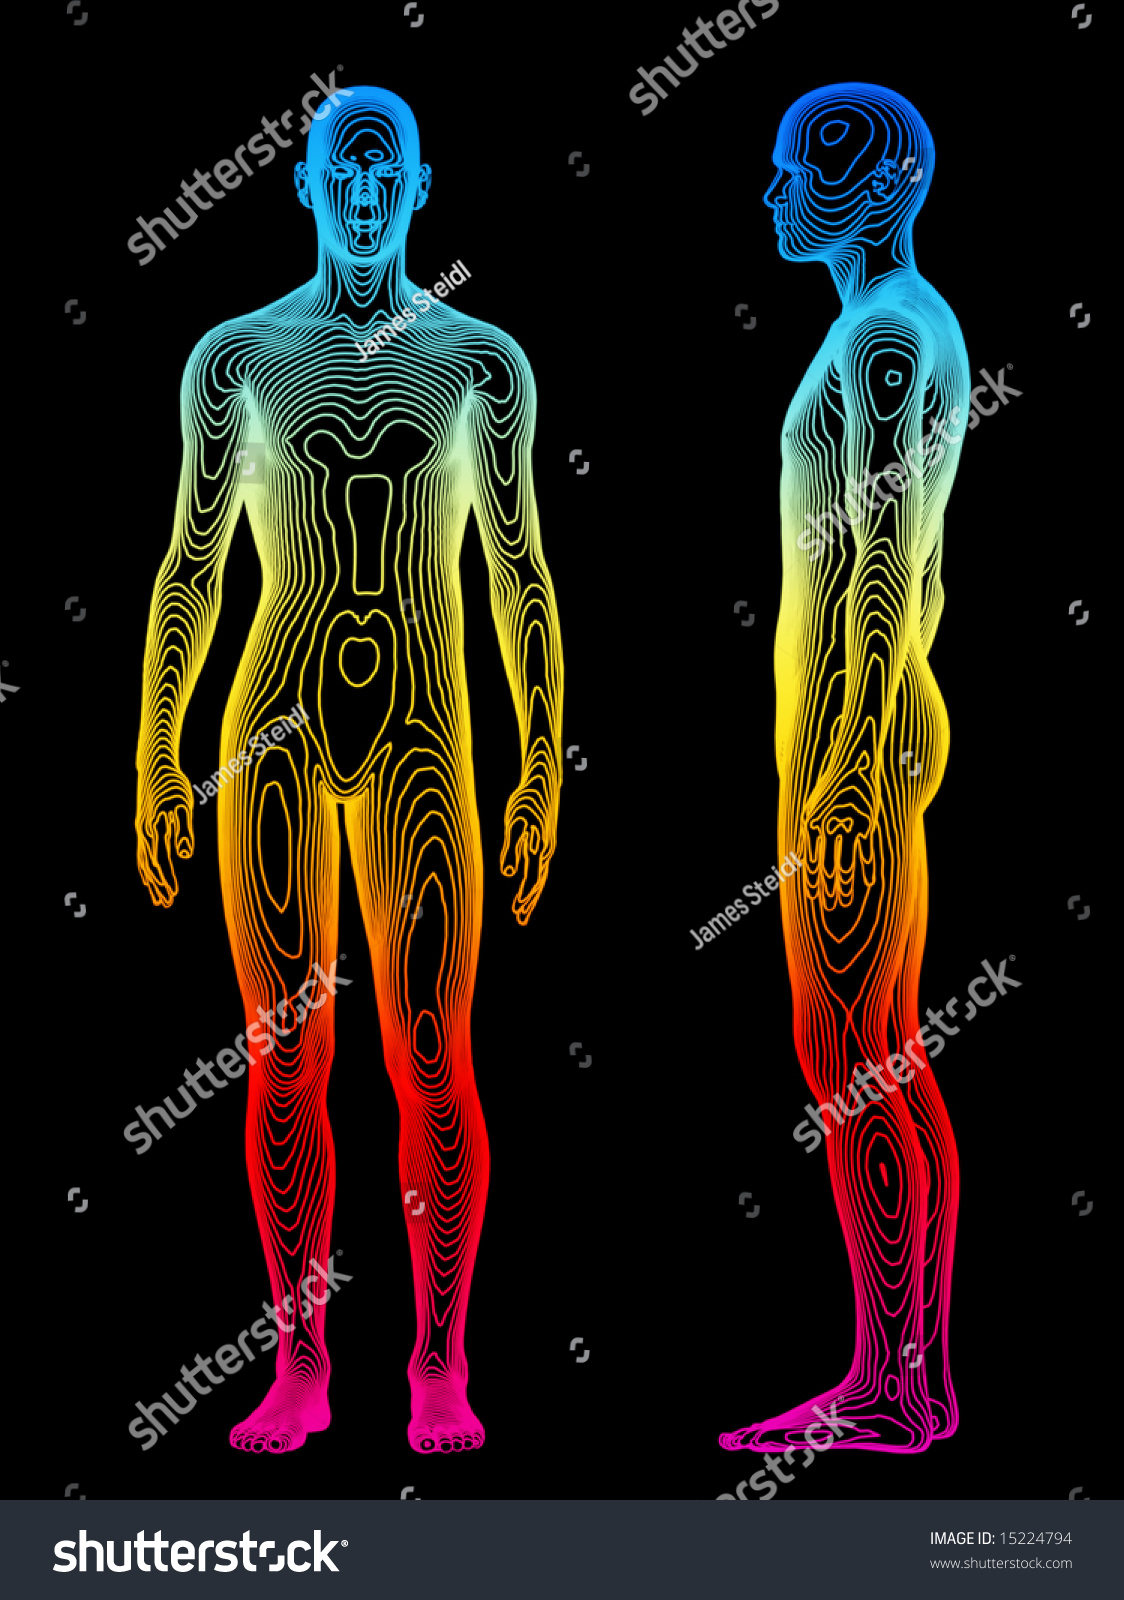 A Medical Concept Of The Human Body Stock Photo 15224794 : Shutterstock